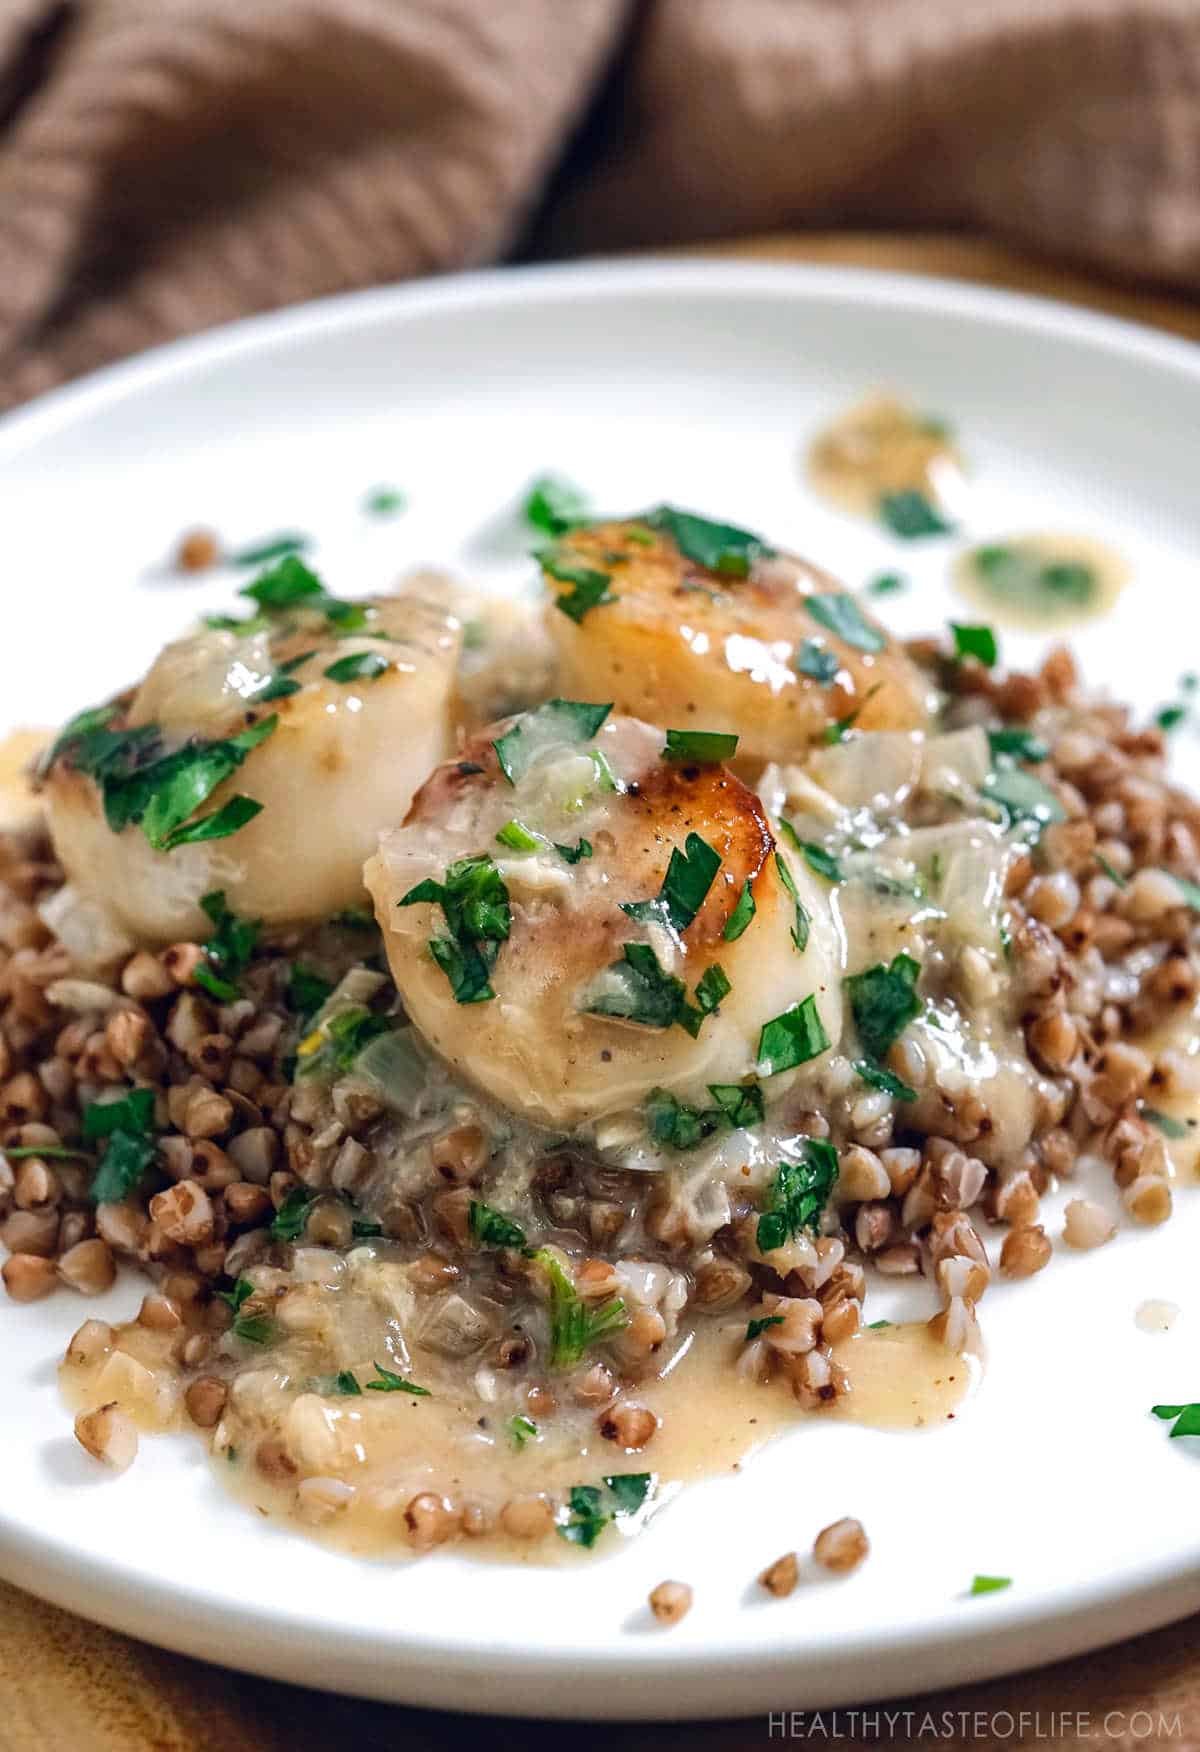 Gluten free scallops dinner: pan seared scallops with dairy free white sauce served over buckwheat. 